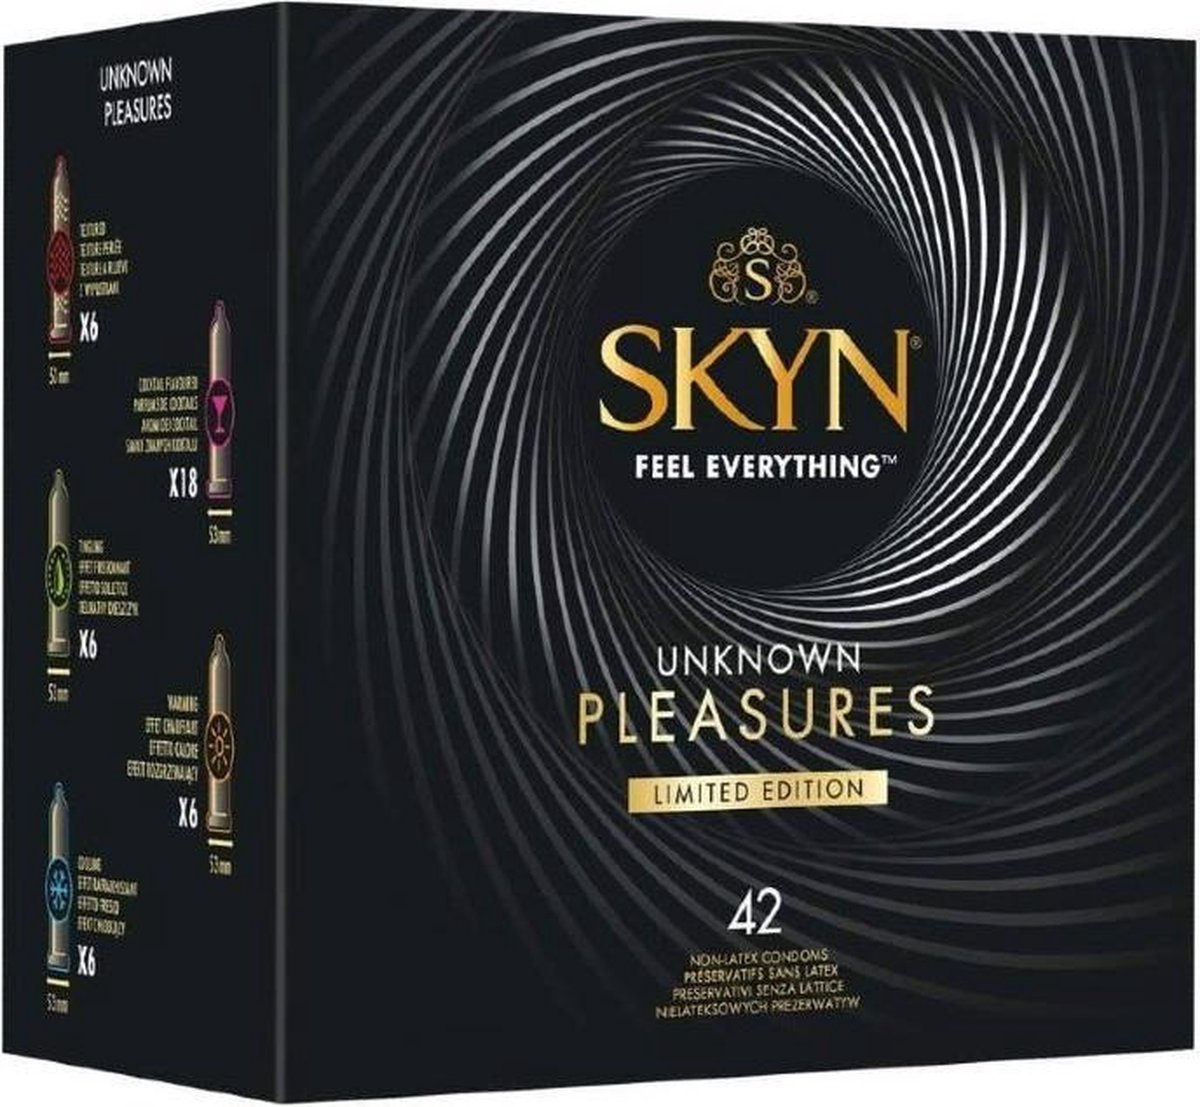 Unimil Skyn Unknown Pleasures Limited Edition nonlatex mix condooms 42st.